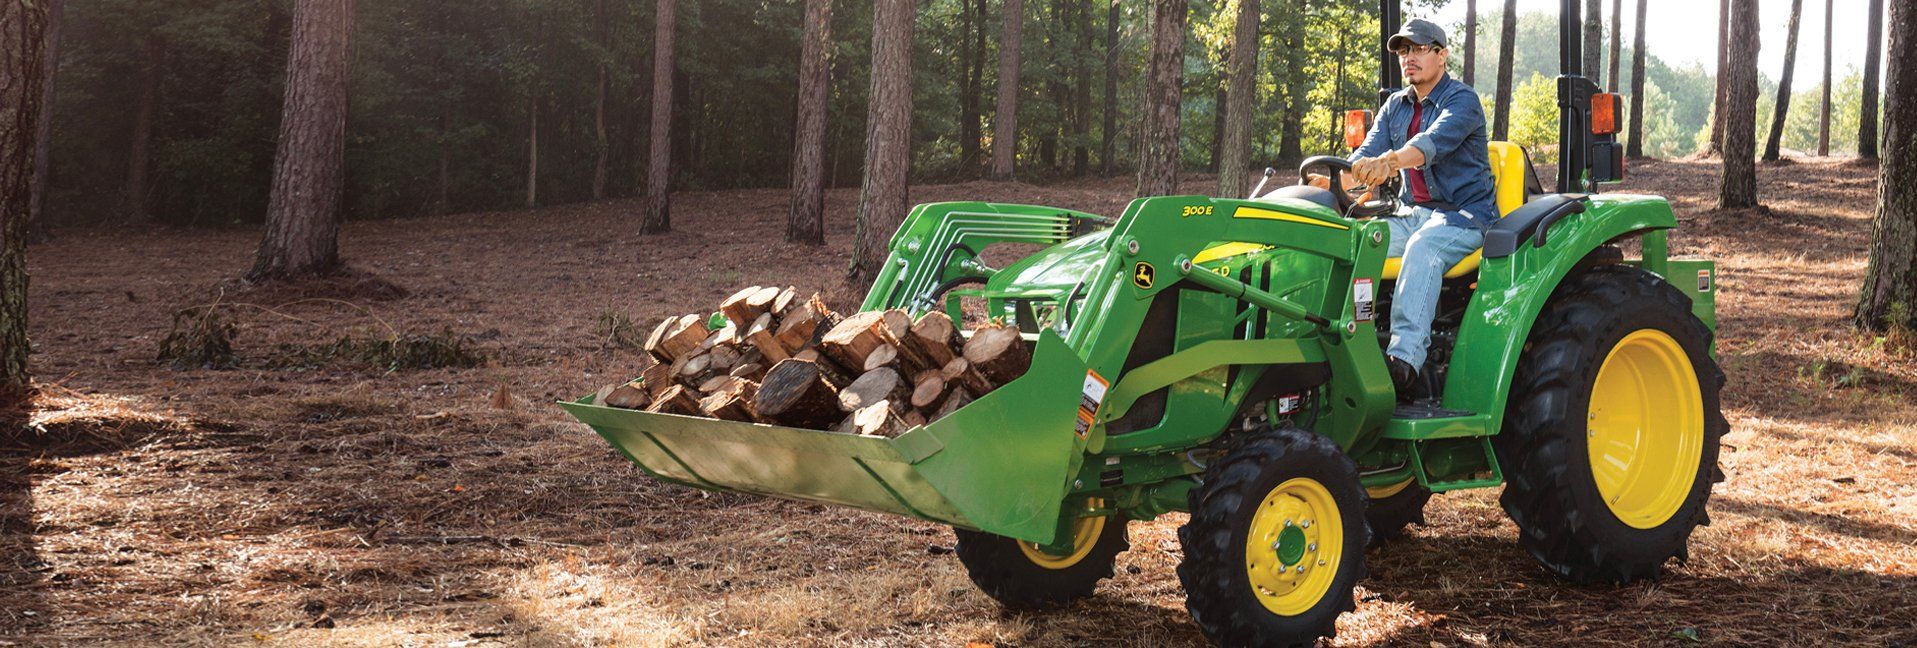 Tough and tiny, subcompact tractors can save the day